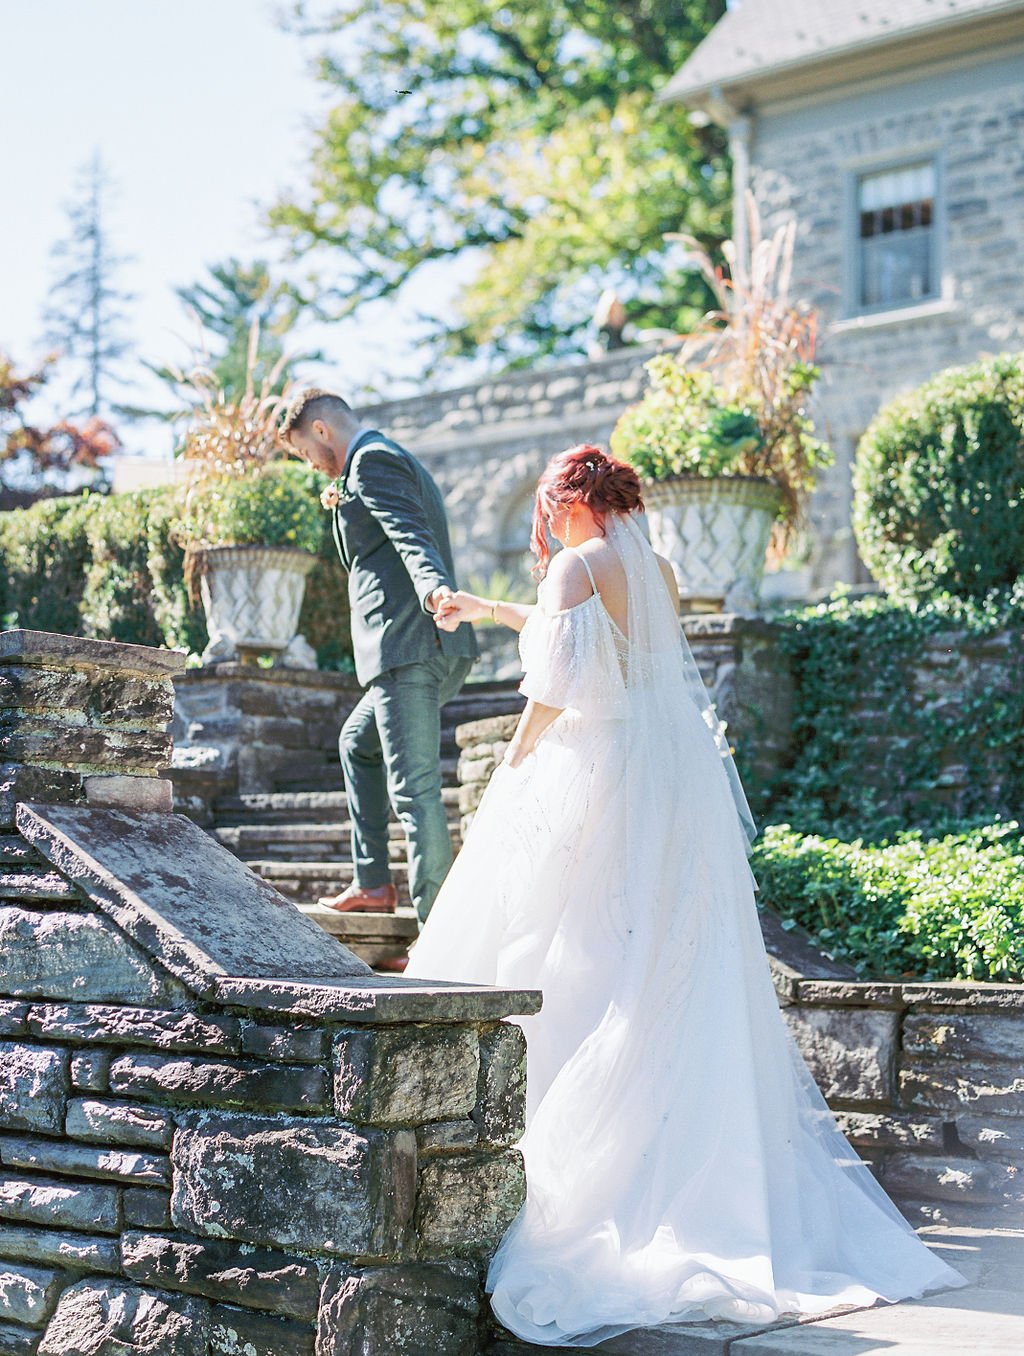 Shannon And Chris' Fine Art Inspired Wedding At Pomme Radnor